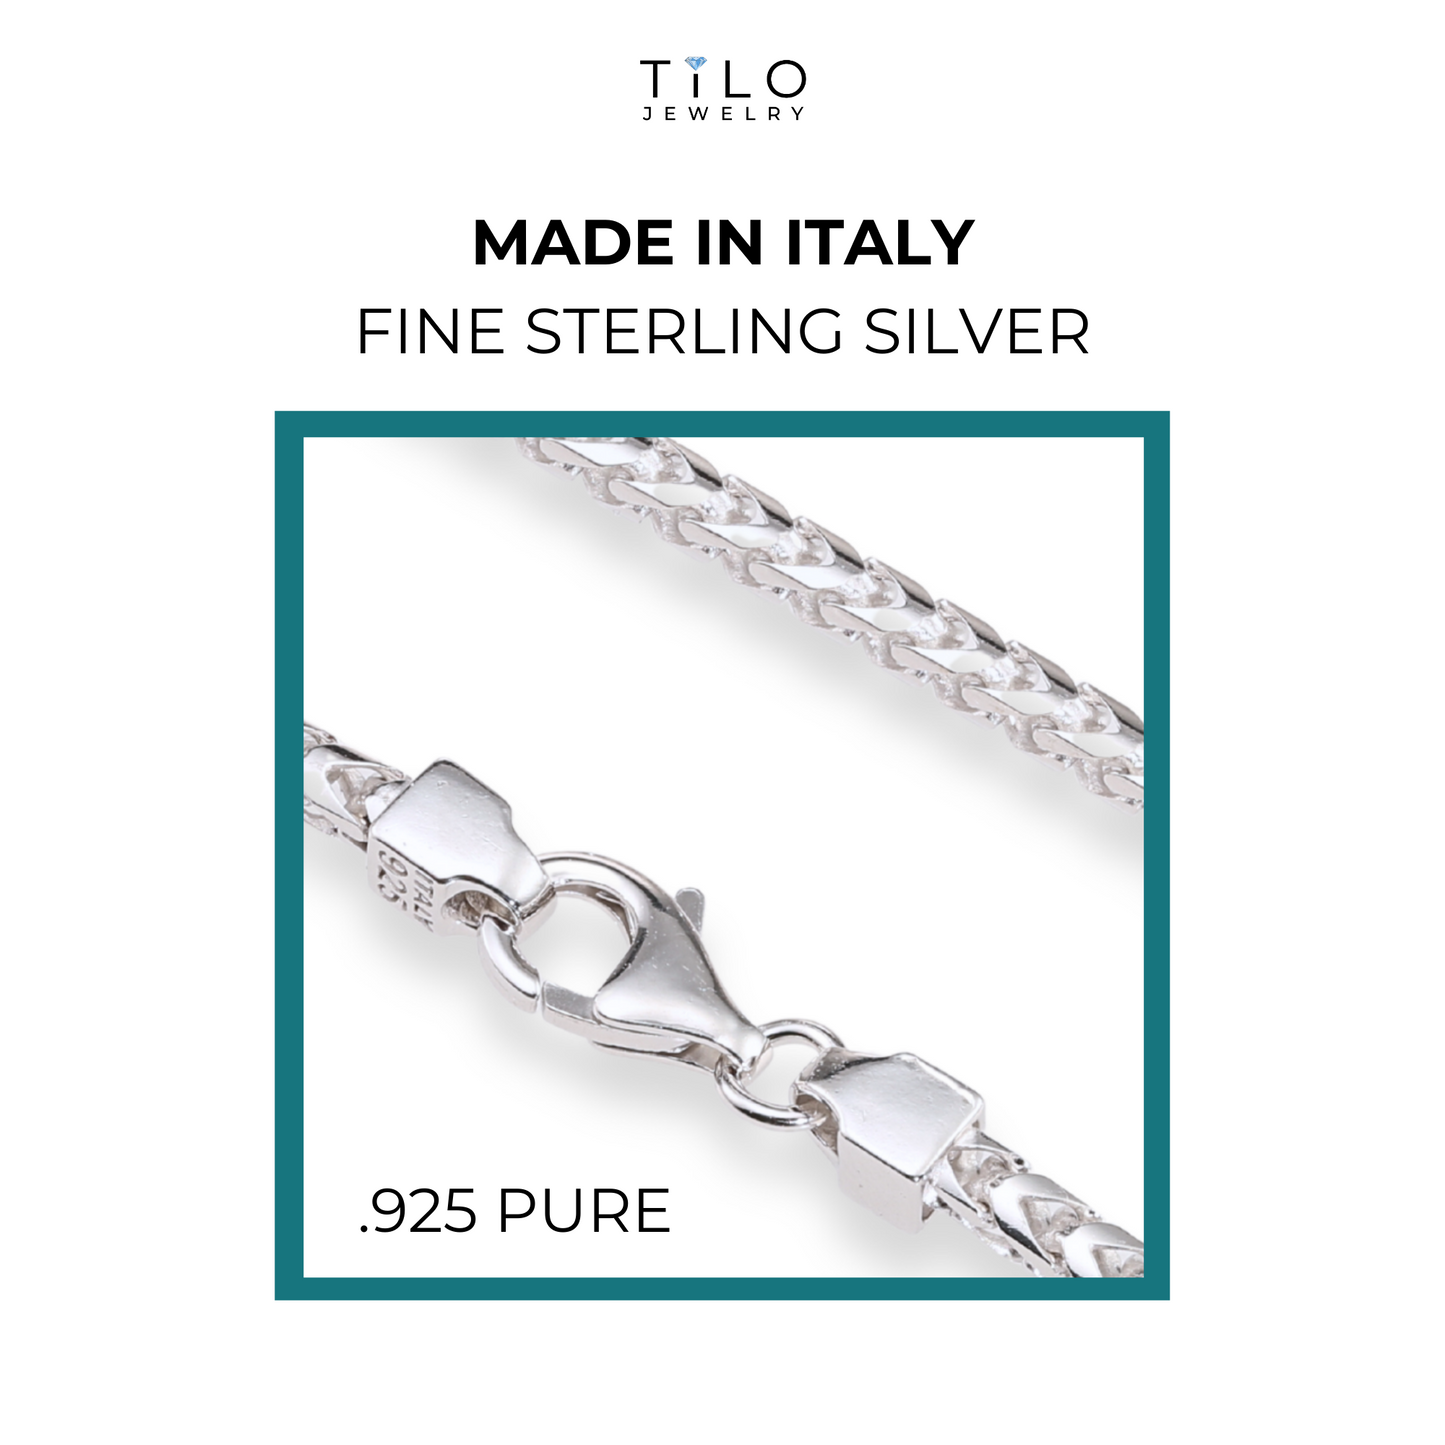 925 Italian Franco Chain, Large Variety of Hot Chains in Sterling Silver with Lobster Locks, Made in Italy